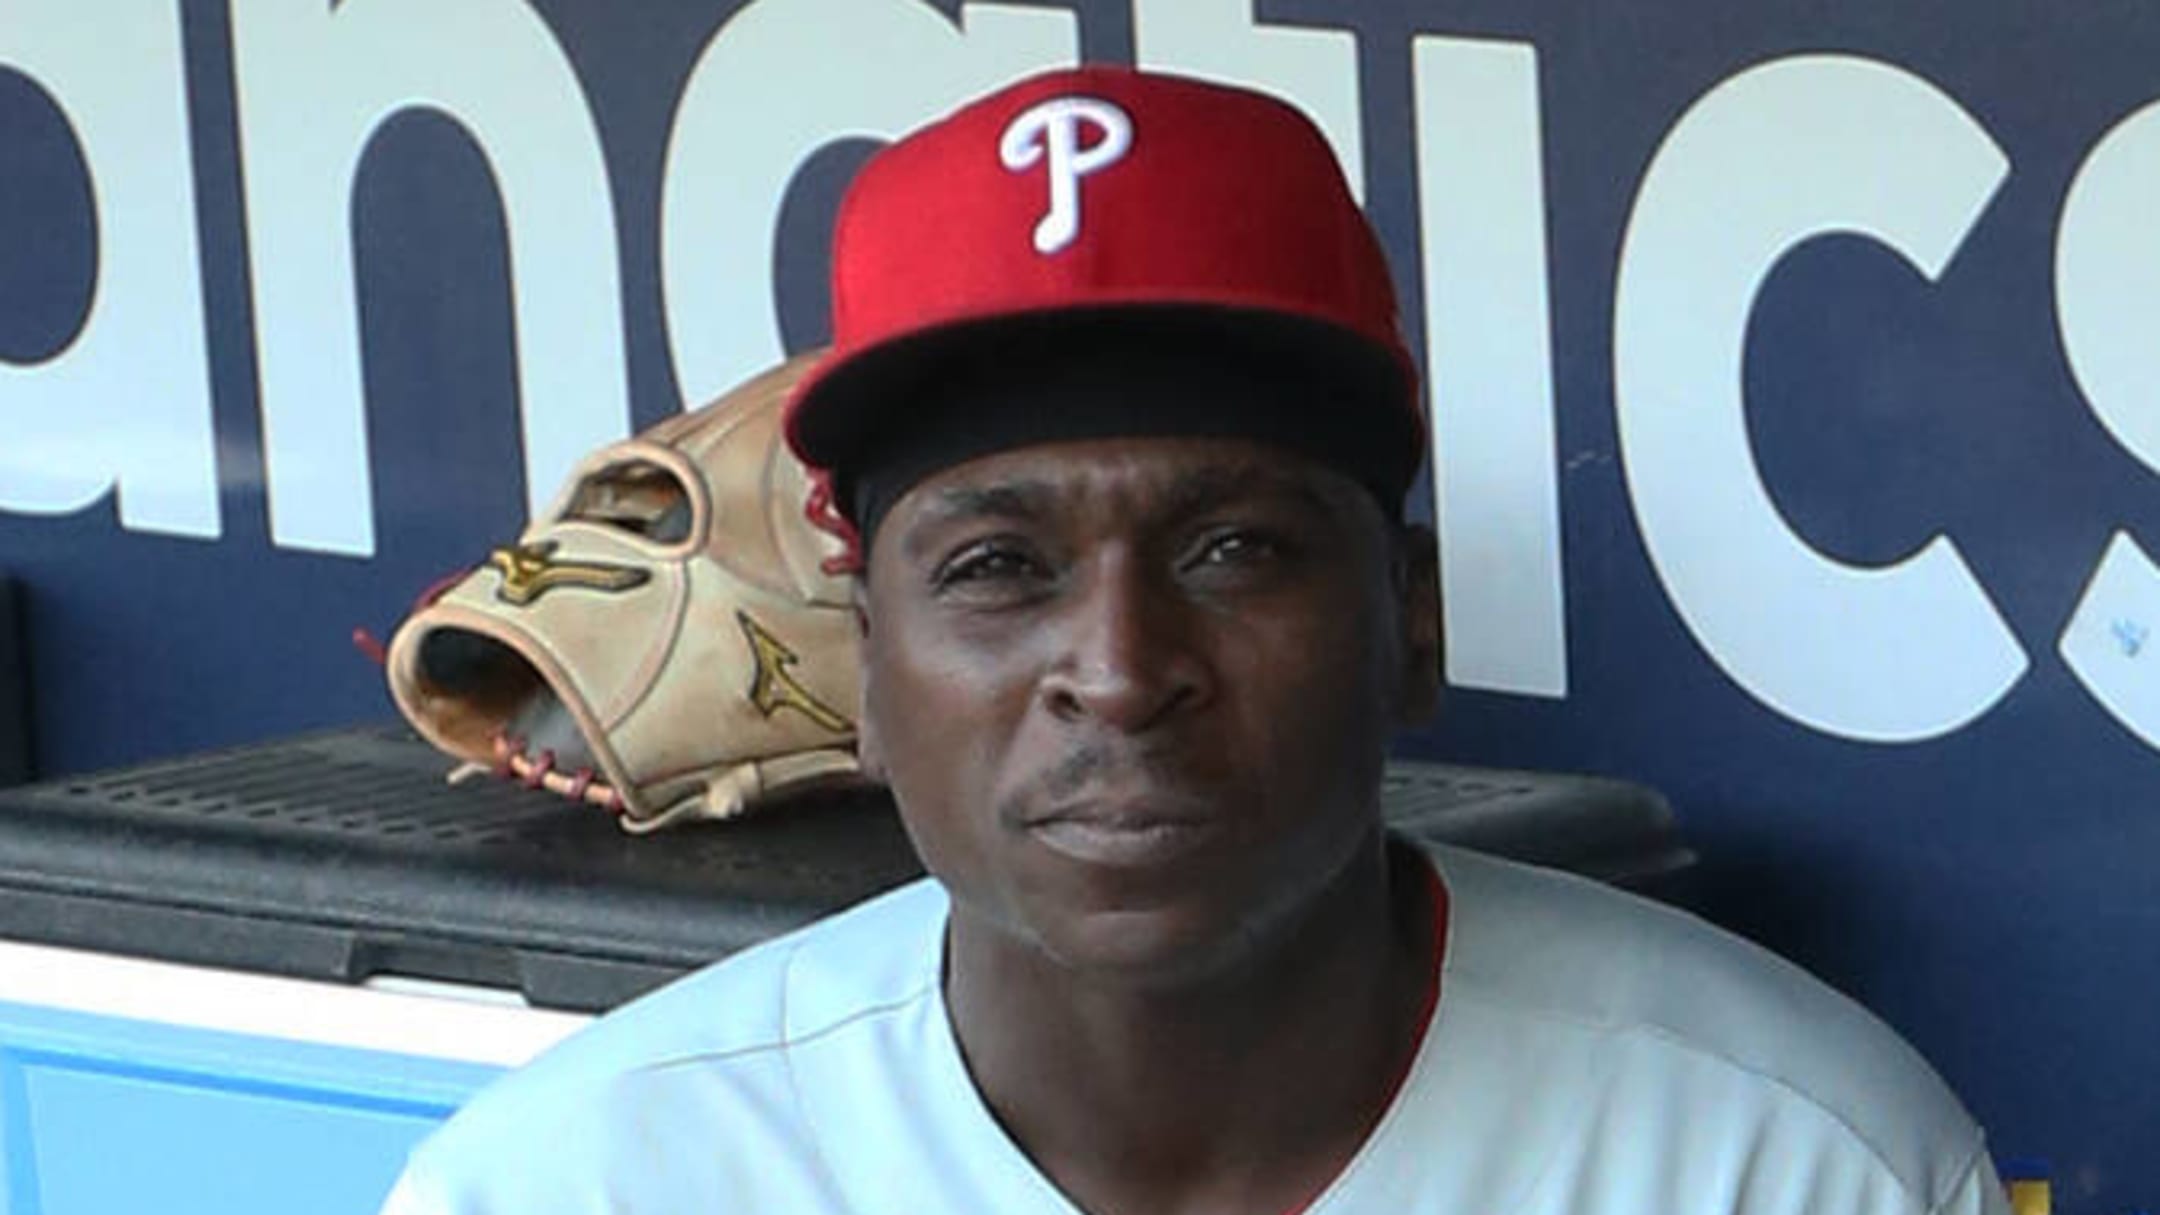 Phillies Notebook: As Jean Segura is activated, Didi Gregorius is released  – Delco Times